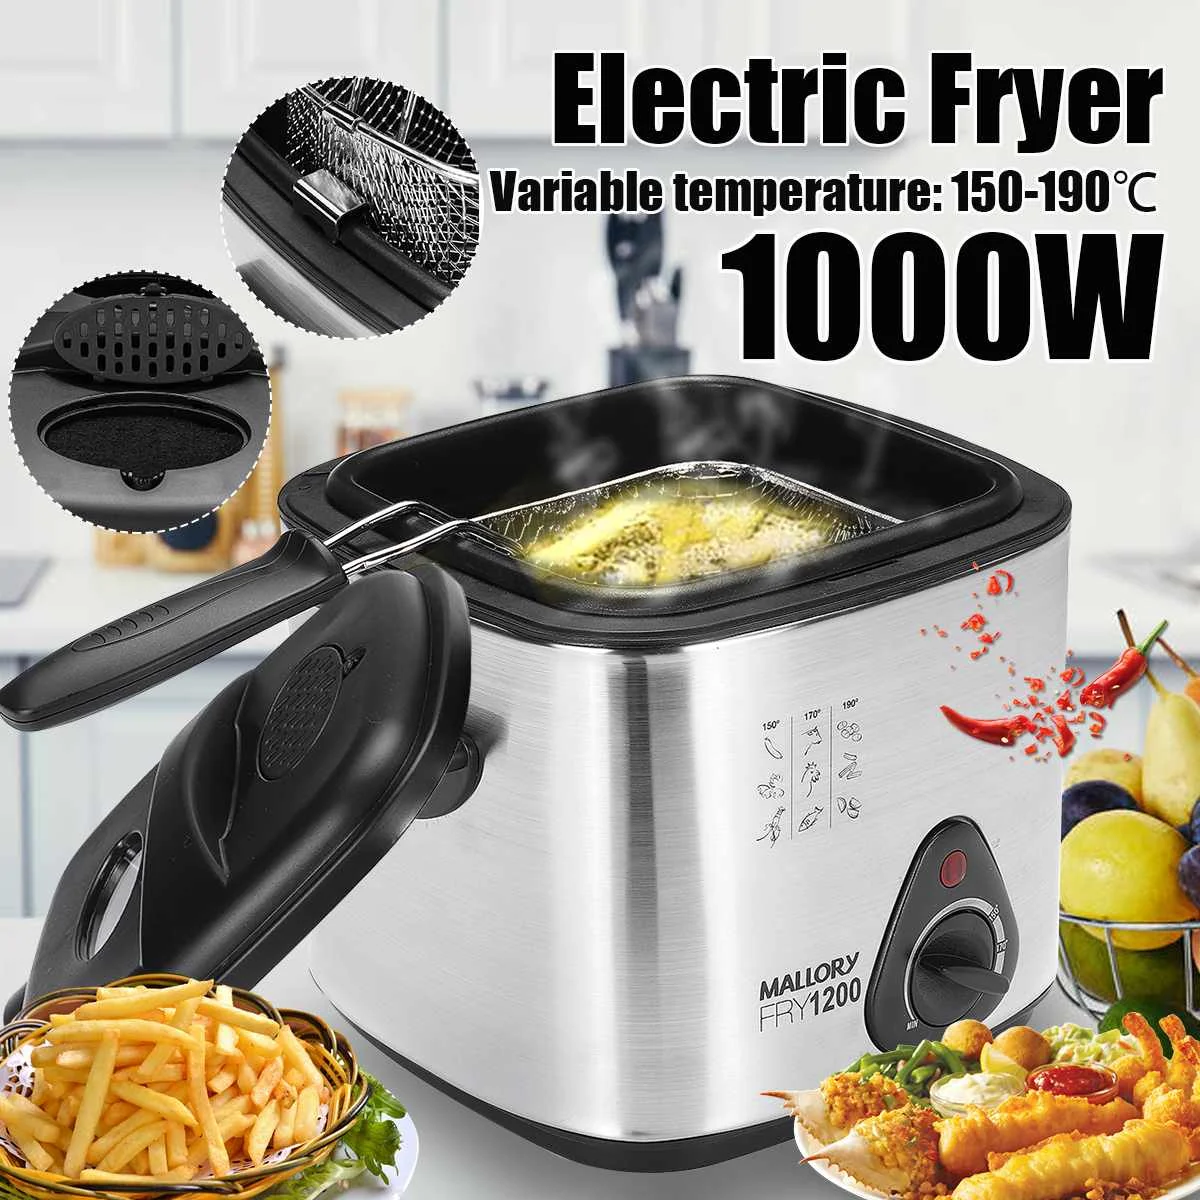 

1000W Electric Deep Fryer 1.5L French Frie Frying Machine Oven Hot Pot Fried Chicken Grill Adjustable Thermostat Kitchen Cooking